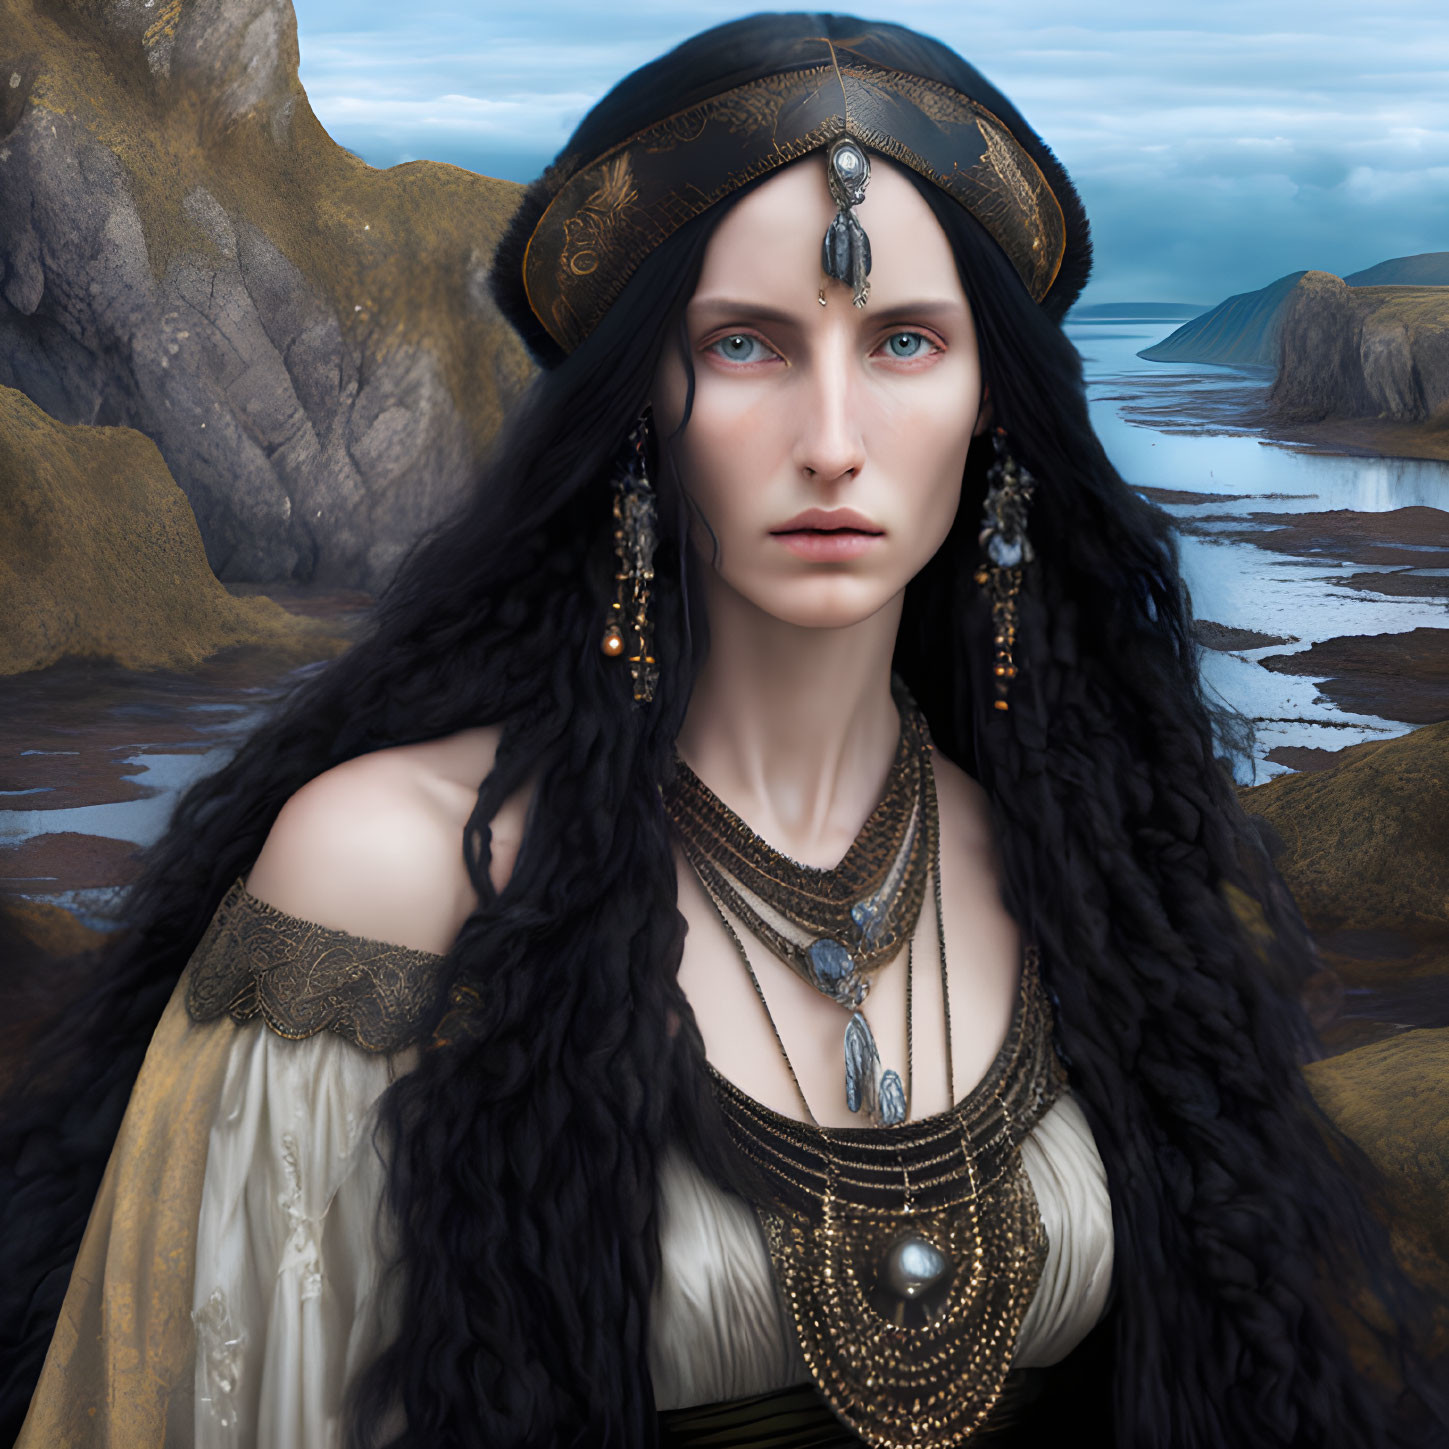 Branwen of Wales by the Sea